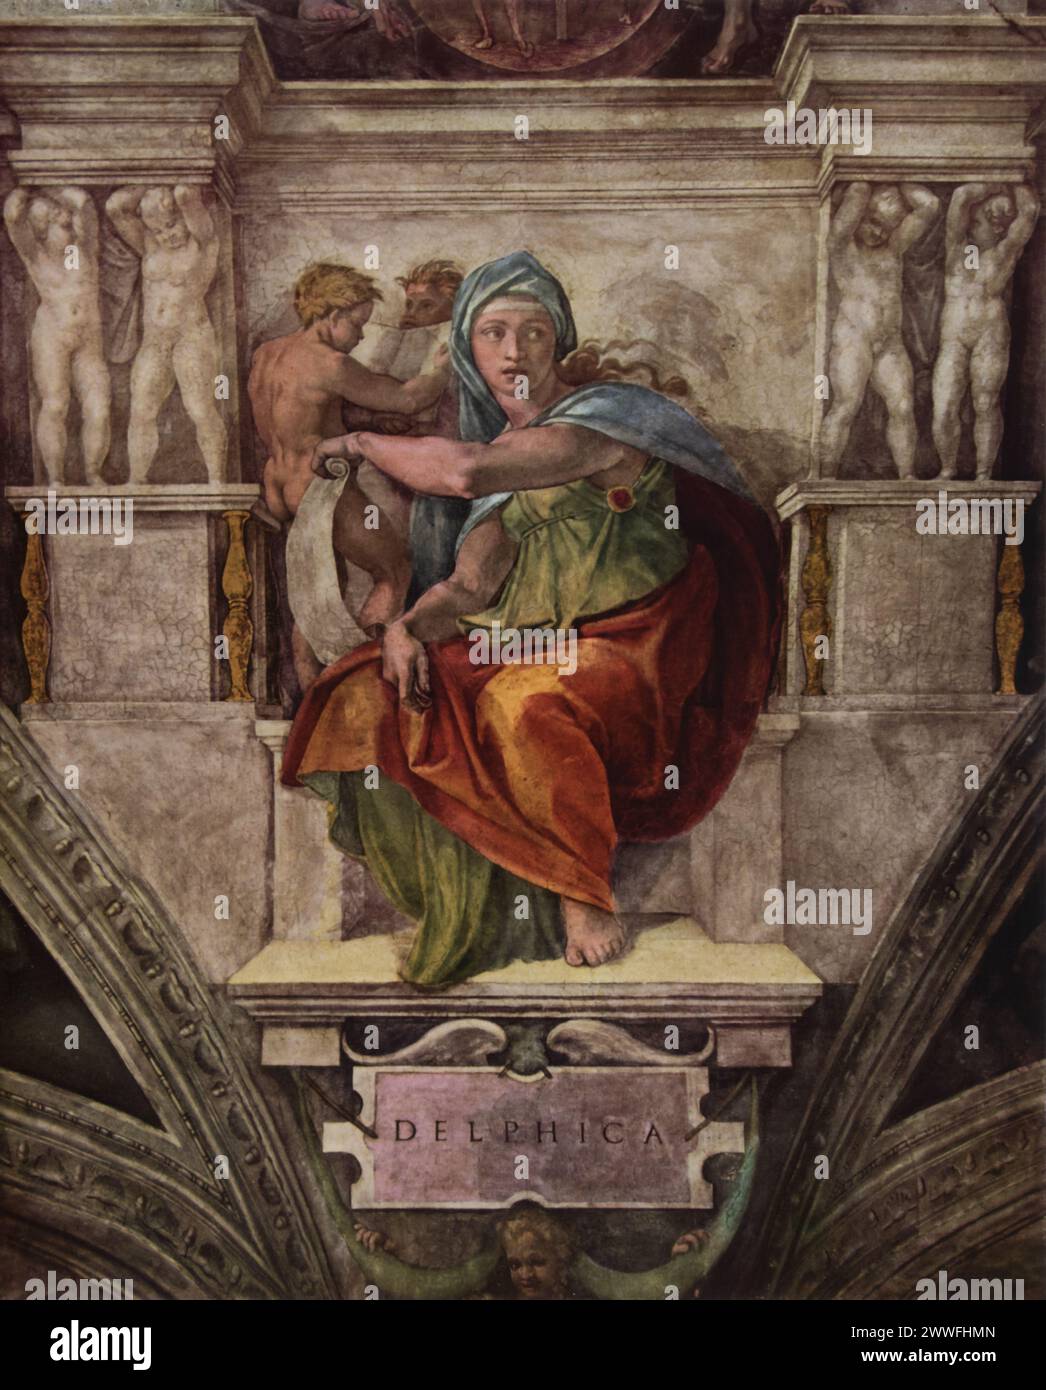 Michelangelo Buonarroti's 'Delphic Sibyl' (circa 1508-1512): Featured on the Sistine Chapel ceiling, Vatican City, this fresco represents one of the pagan prophetesses granted foresight by the gods. Michelangelo's depiction of the Delphic Sibyl, with her intense gaze and dynamic posture, exemplifies the High Renaissance's blend of classical mythology with Christian themes. Stock Photo